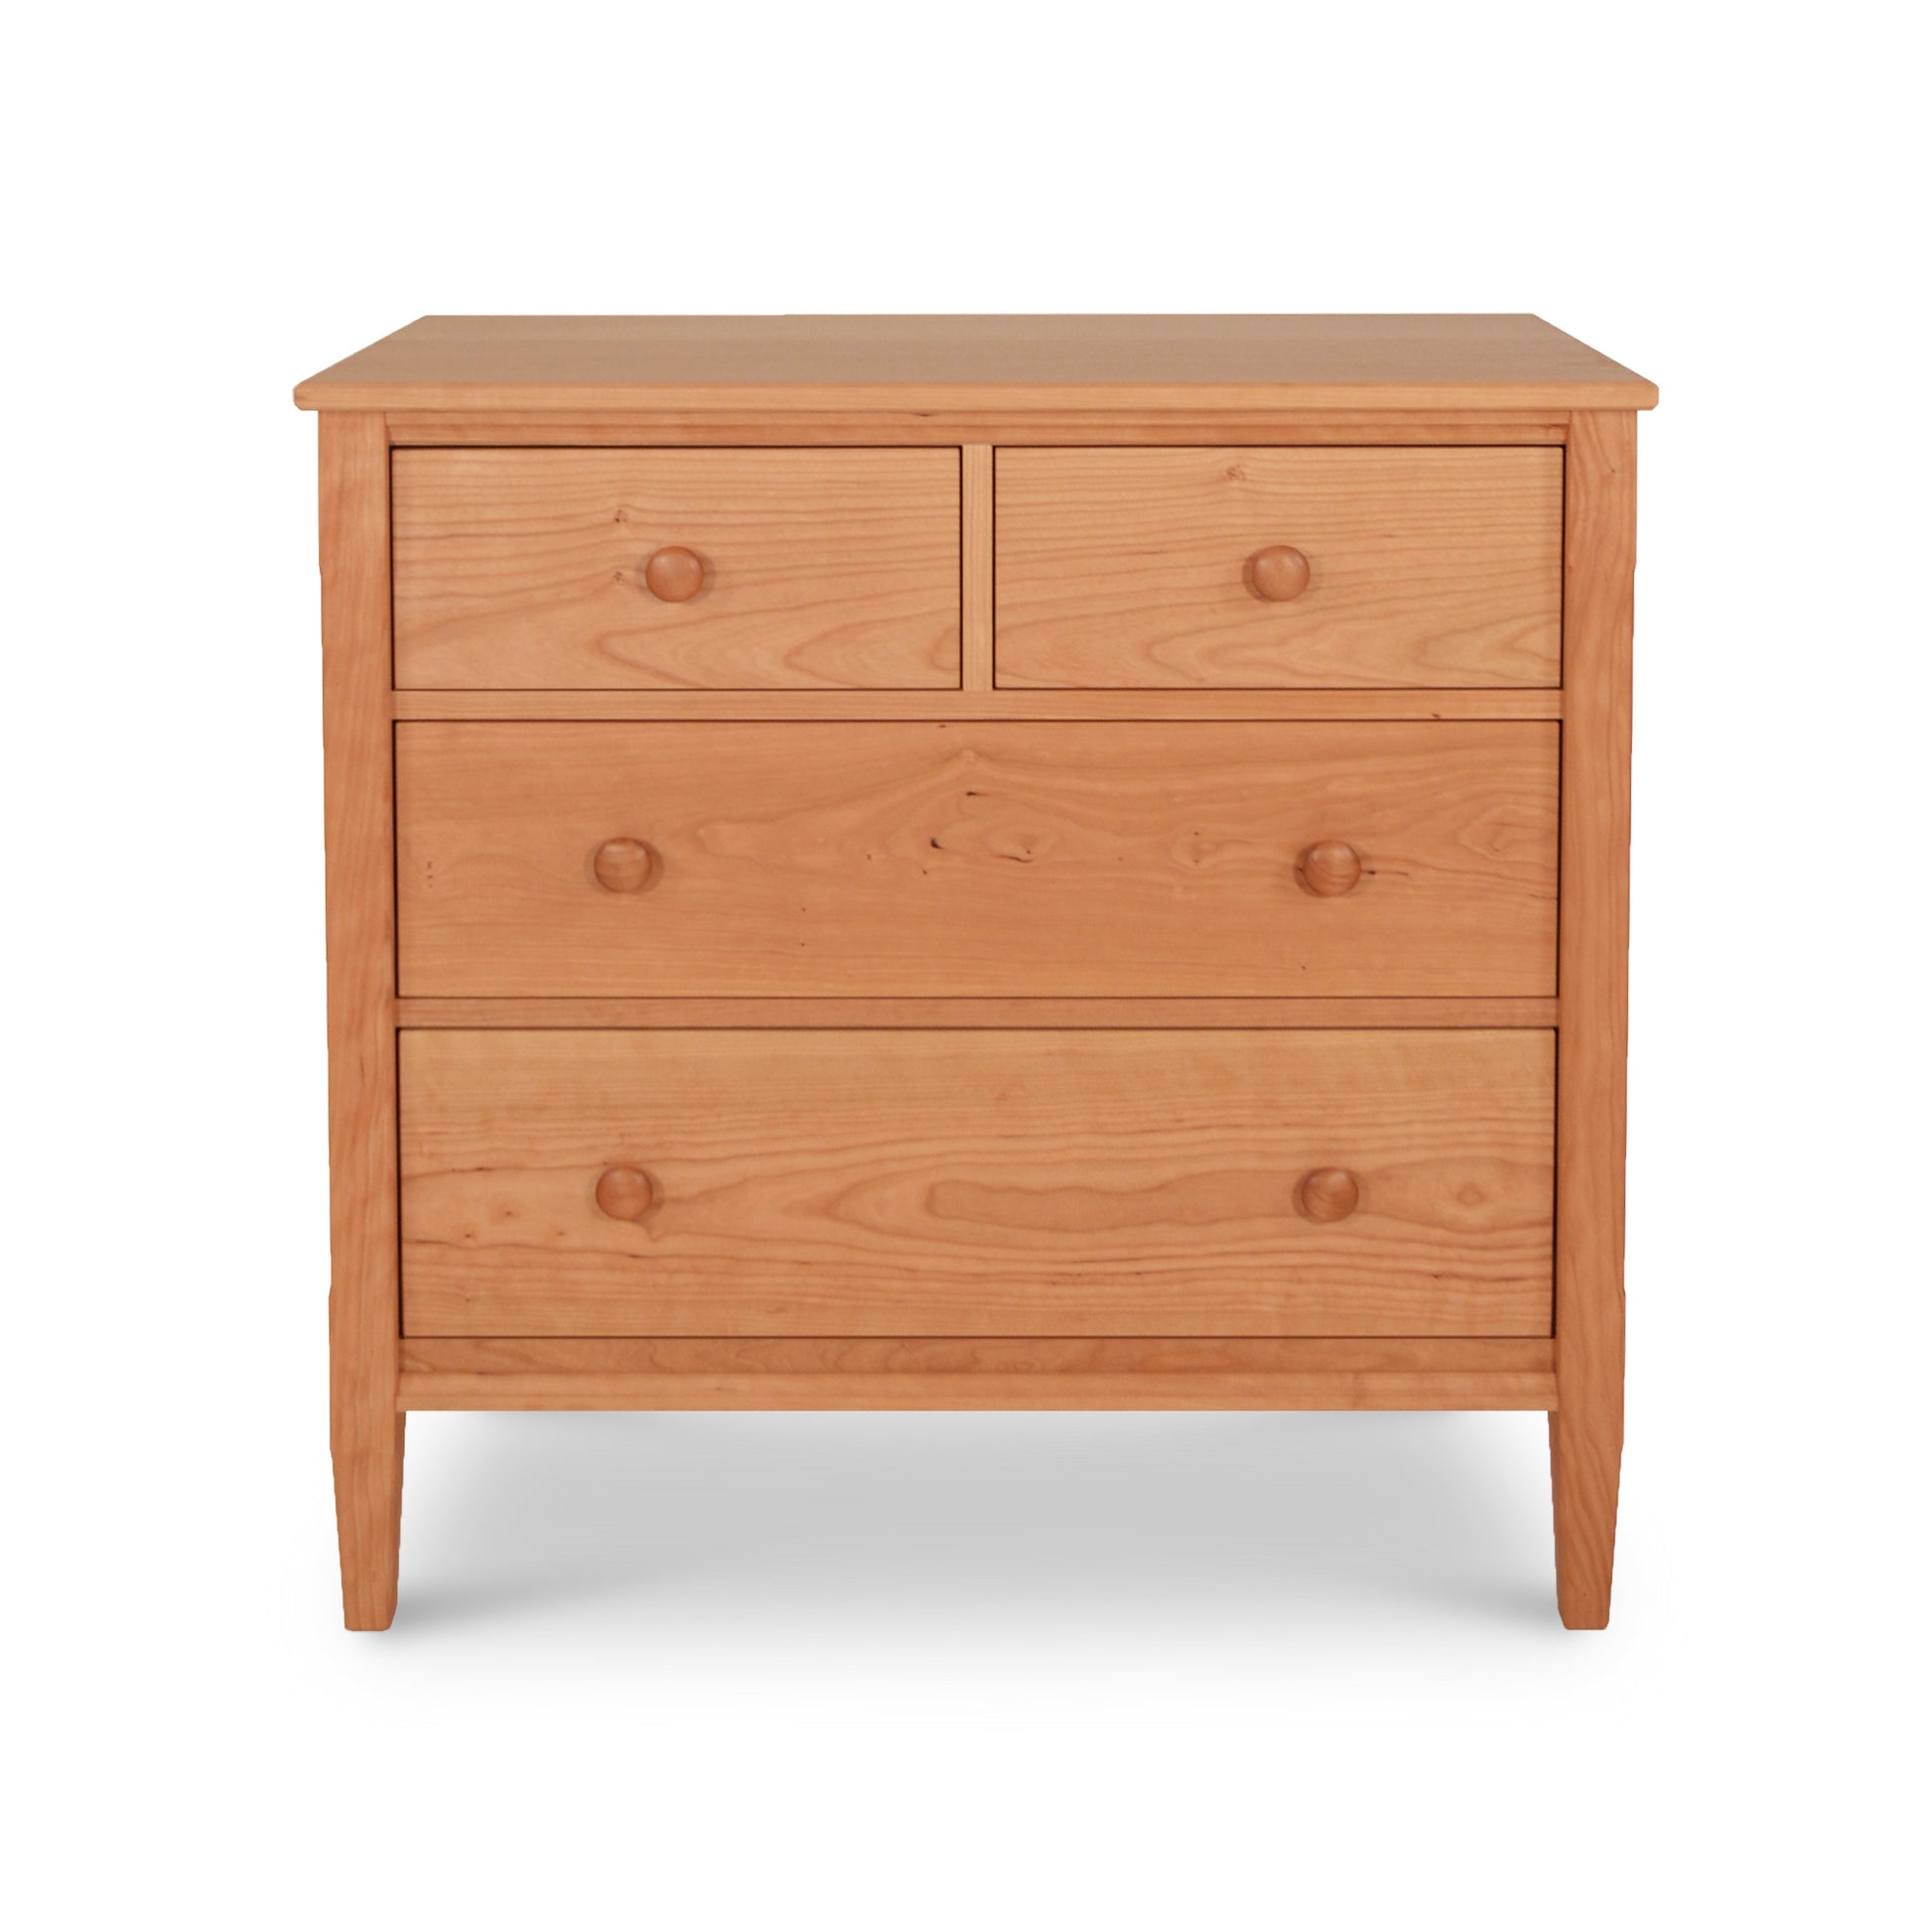 A Maple Corner Woodworks Vermont Shaker 4-drawer chest, handmade from wood, on a white background.